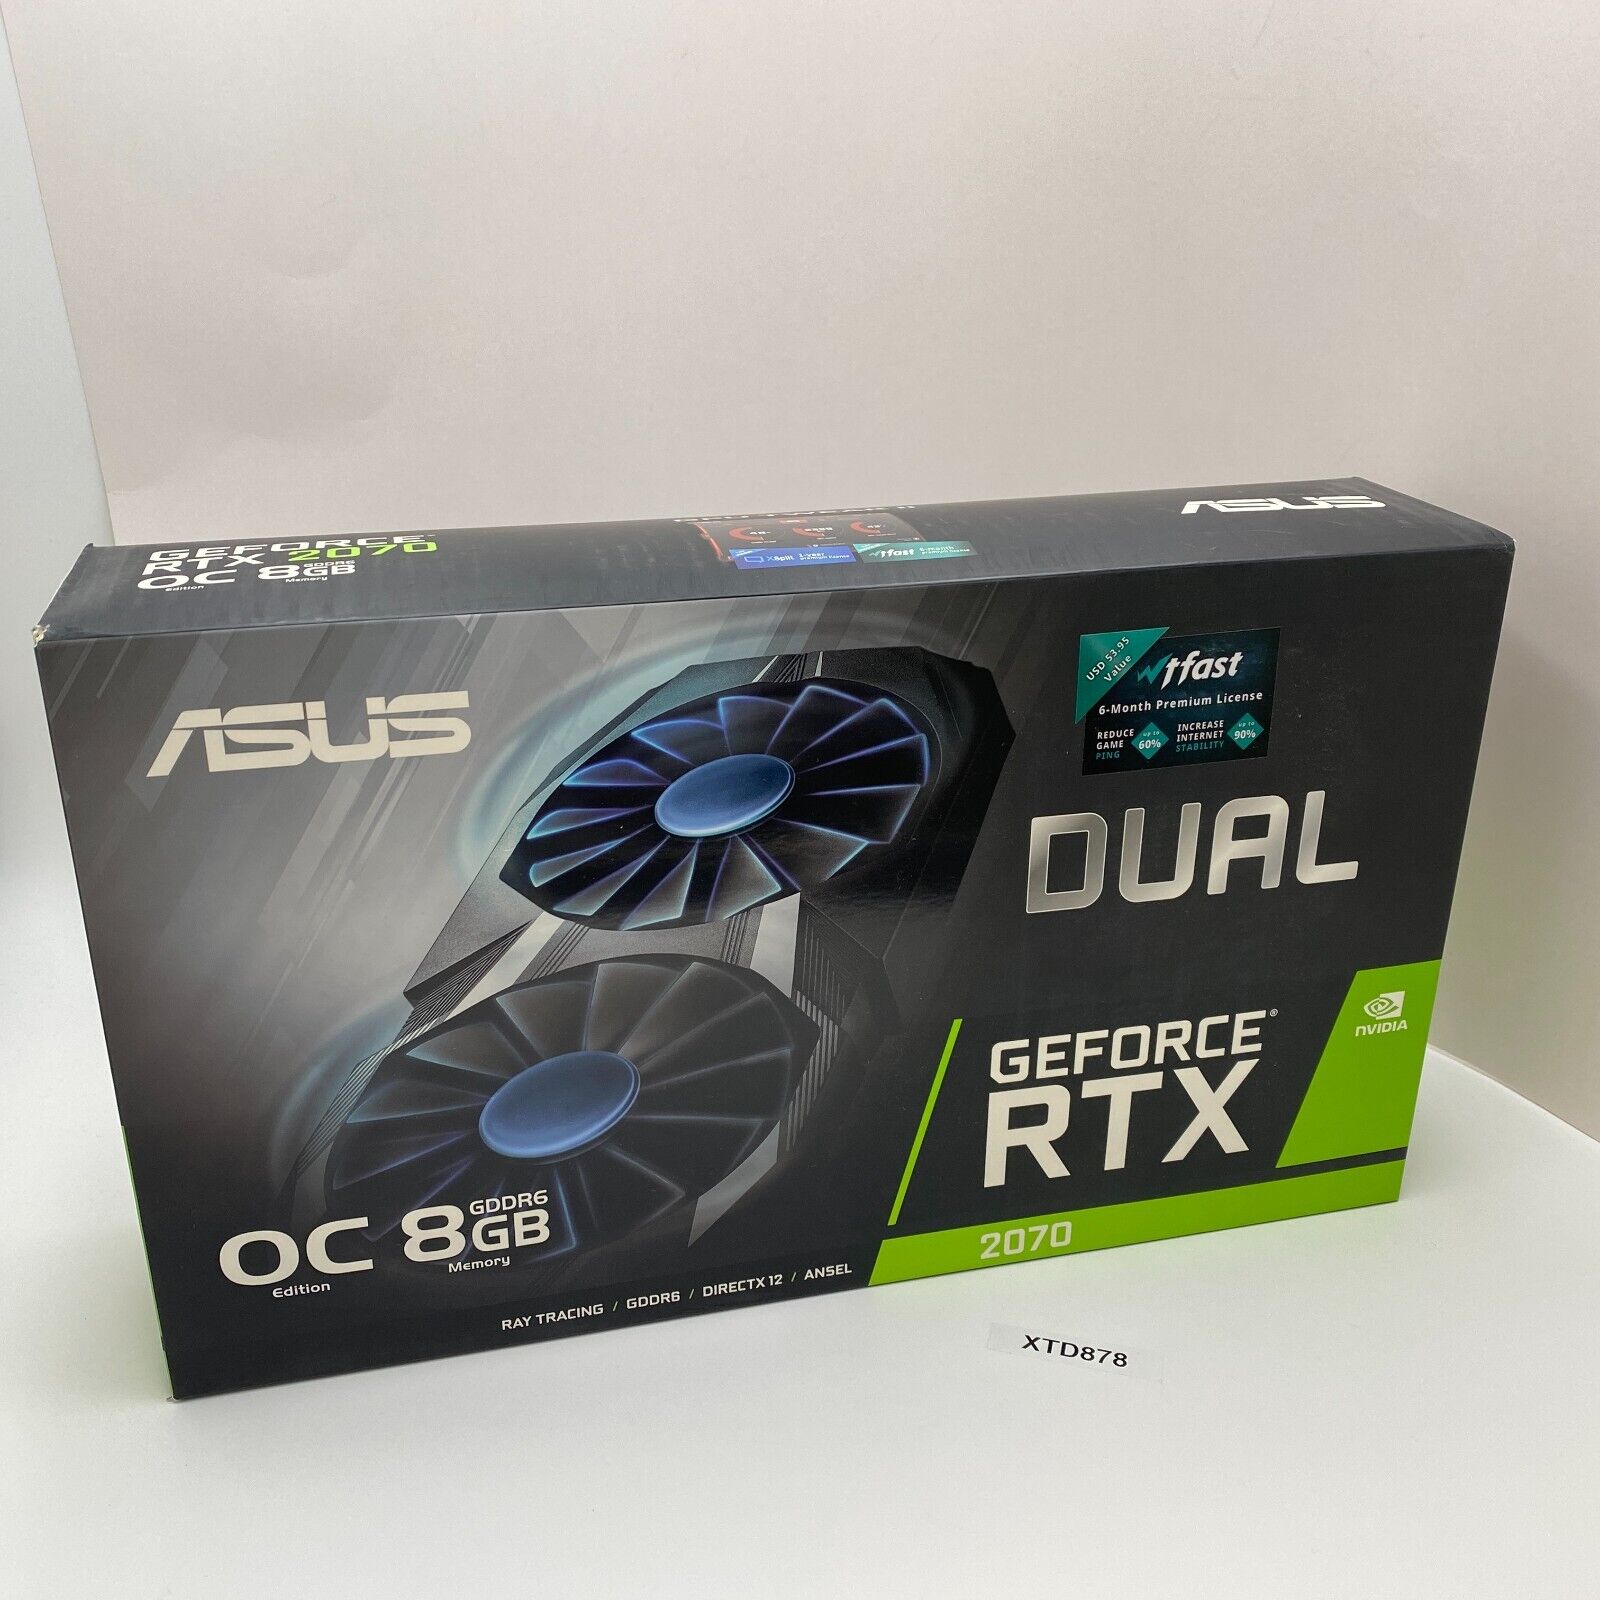 ASUS DUAL GeForce RTX 2070 OC Graphics Card DUAL-RTX2070-O8G - Good Condition